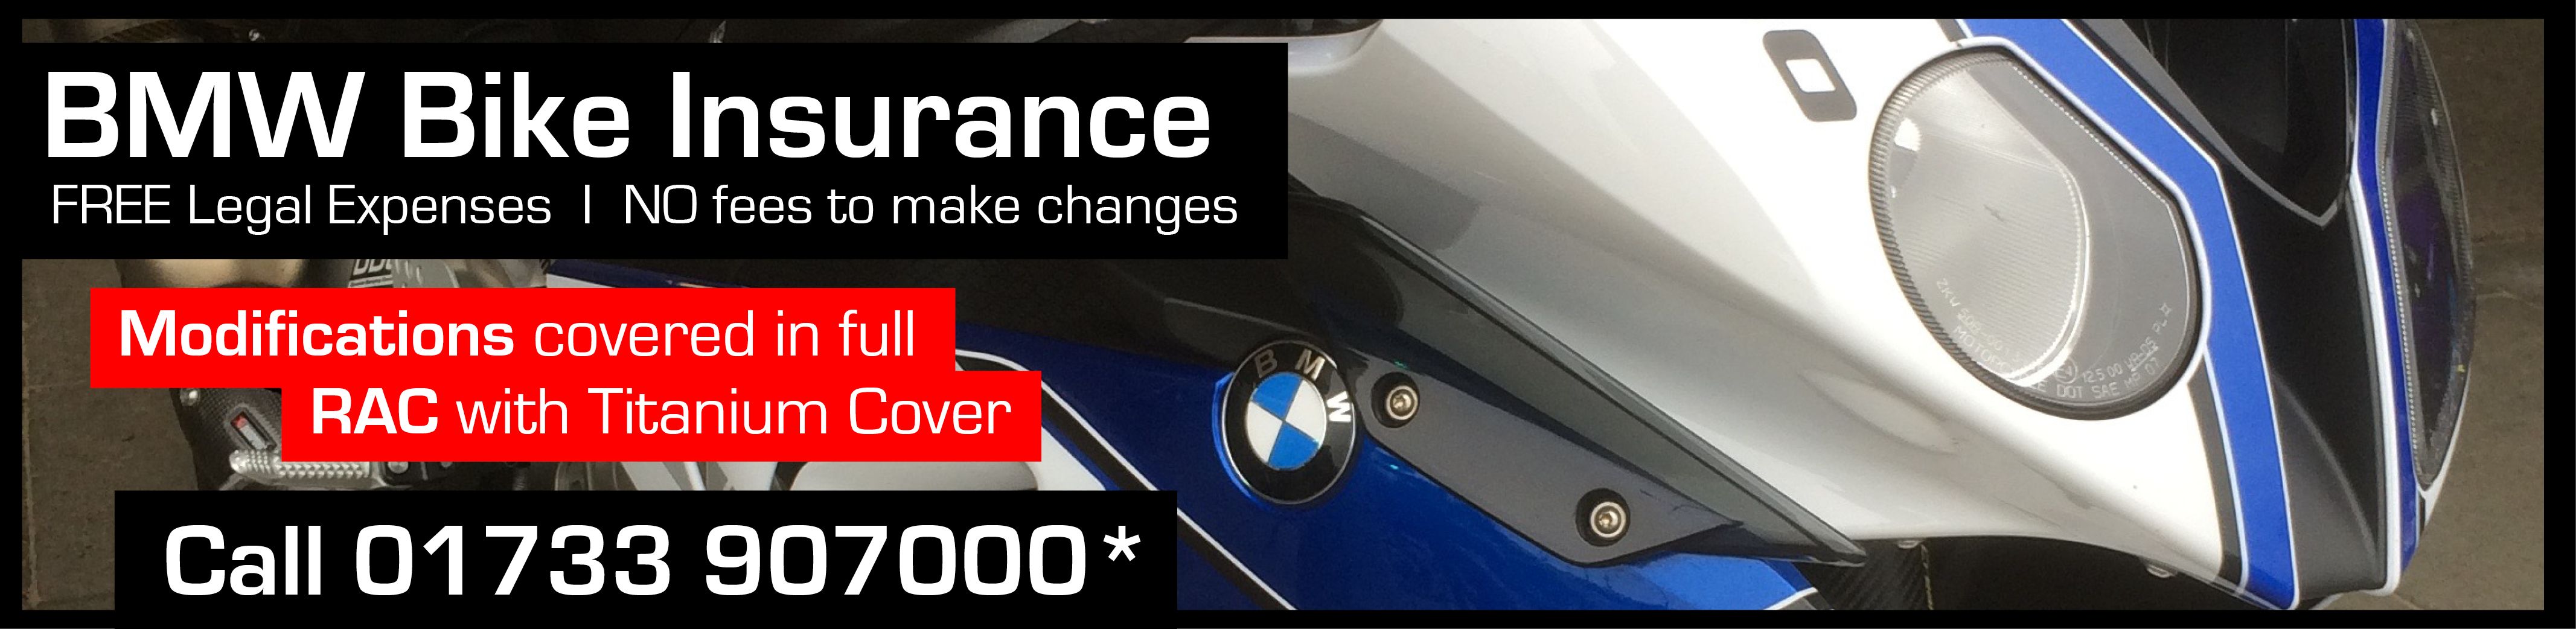 BMW insurance that's recommended by S1000RR forum members | BeMoto